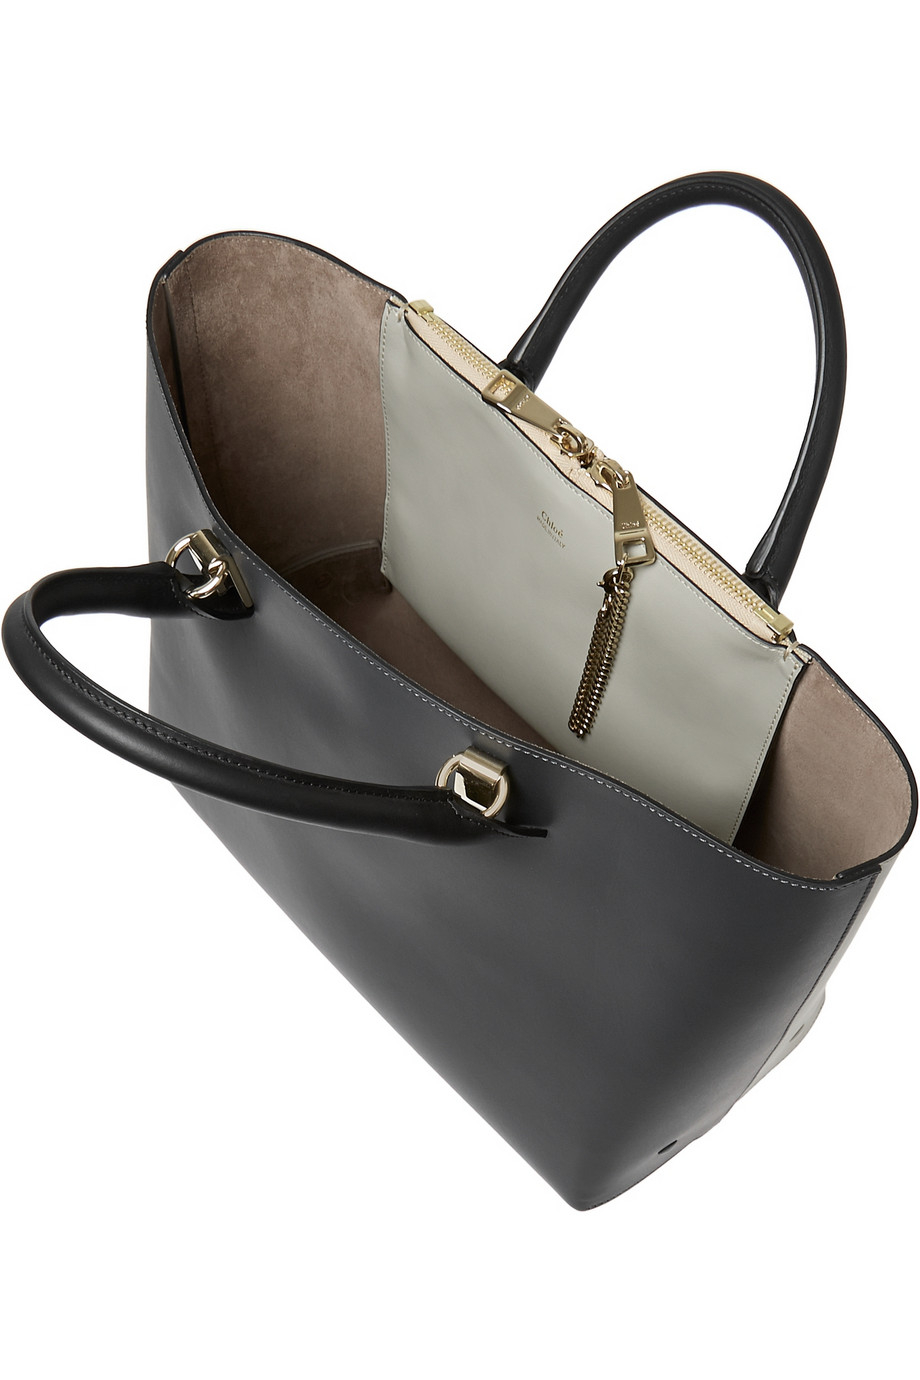 cloe hand bags - Chlo Baylee Large Two-Tone Leather Tote in Black (Gray) | Lyst